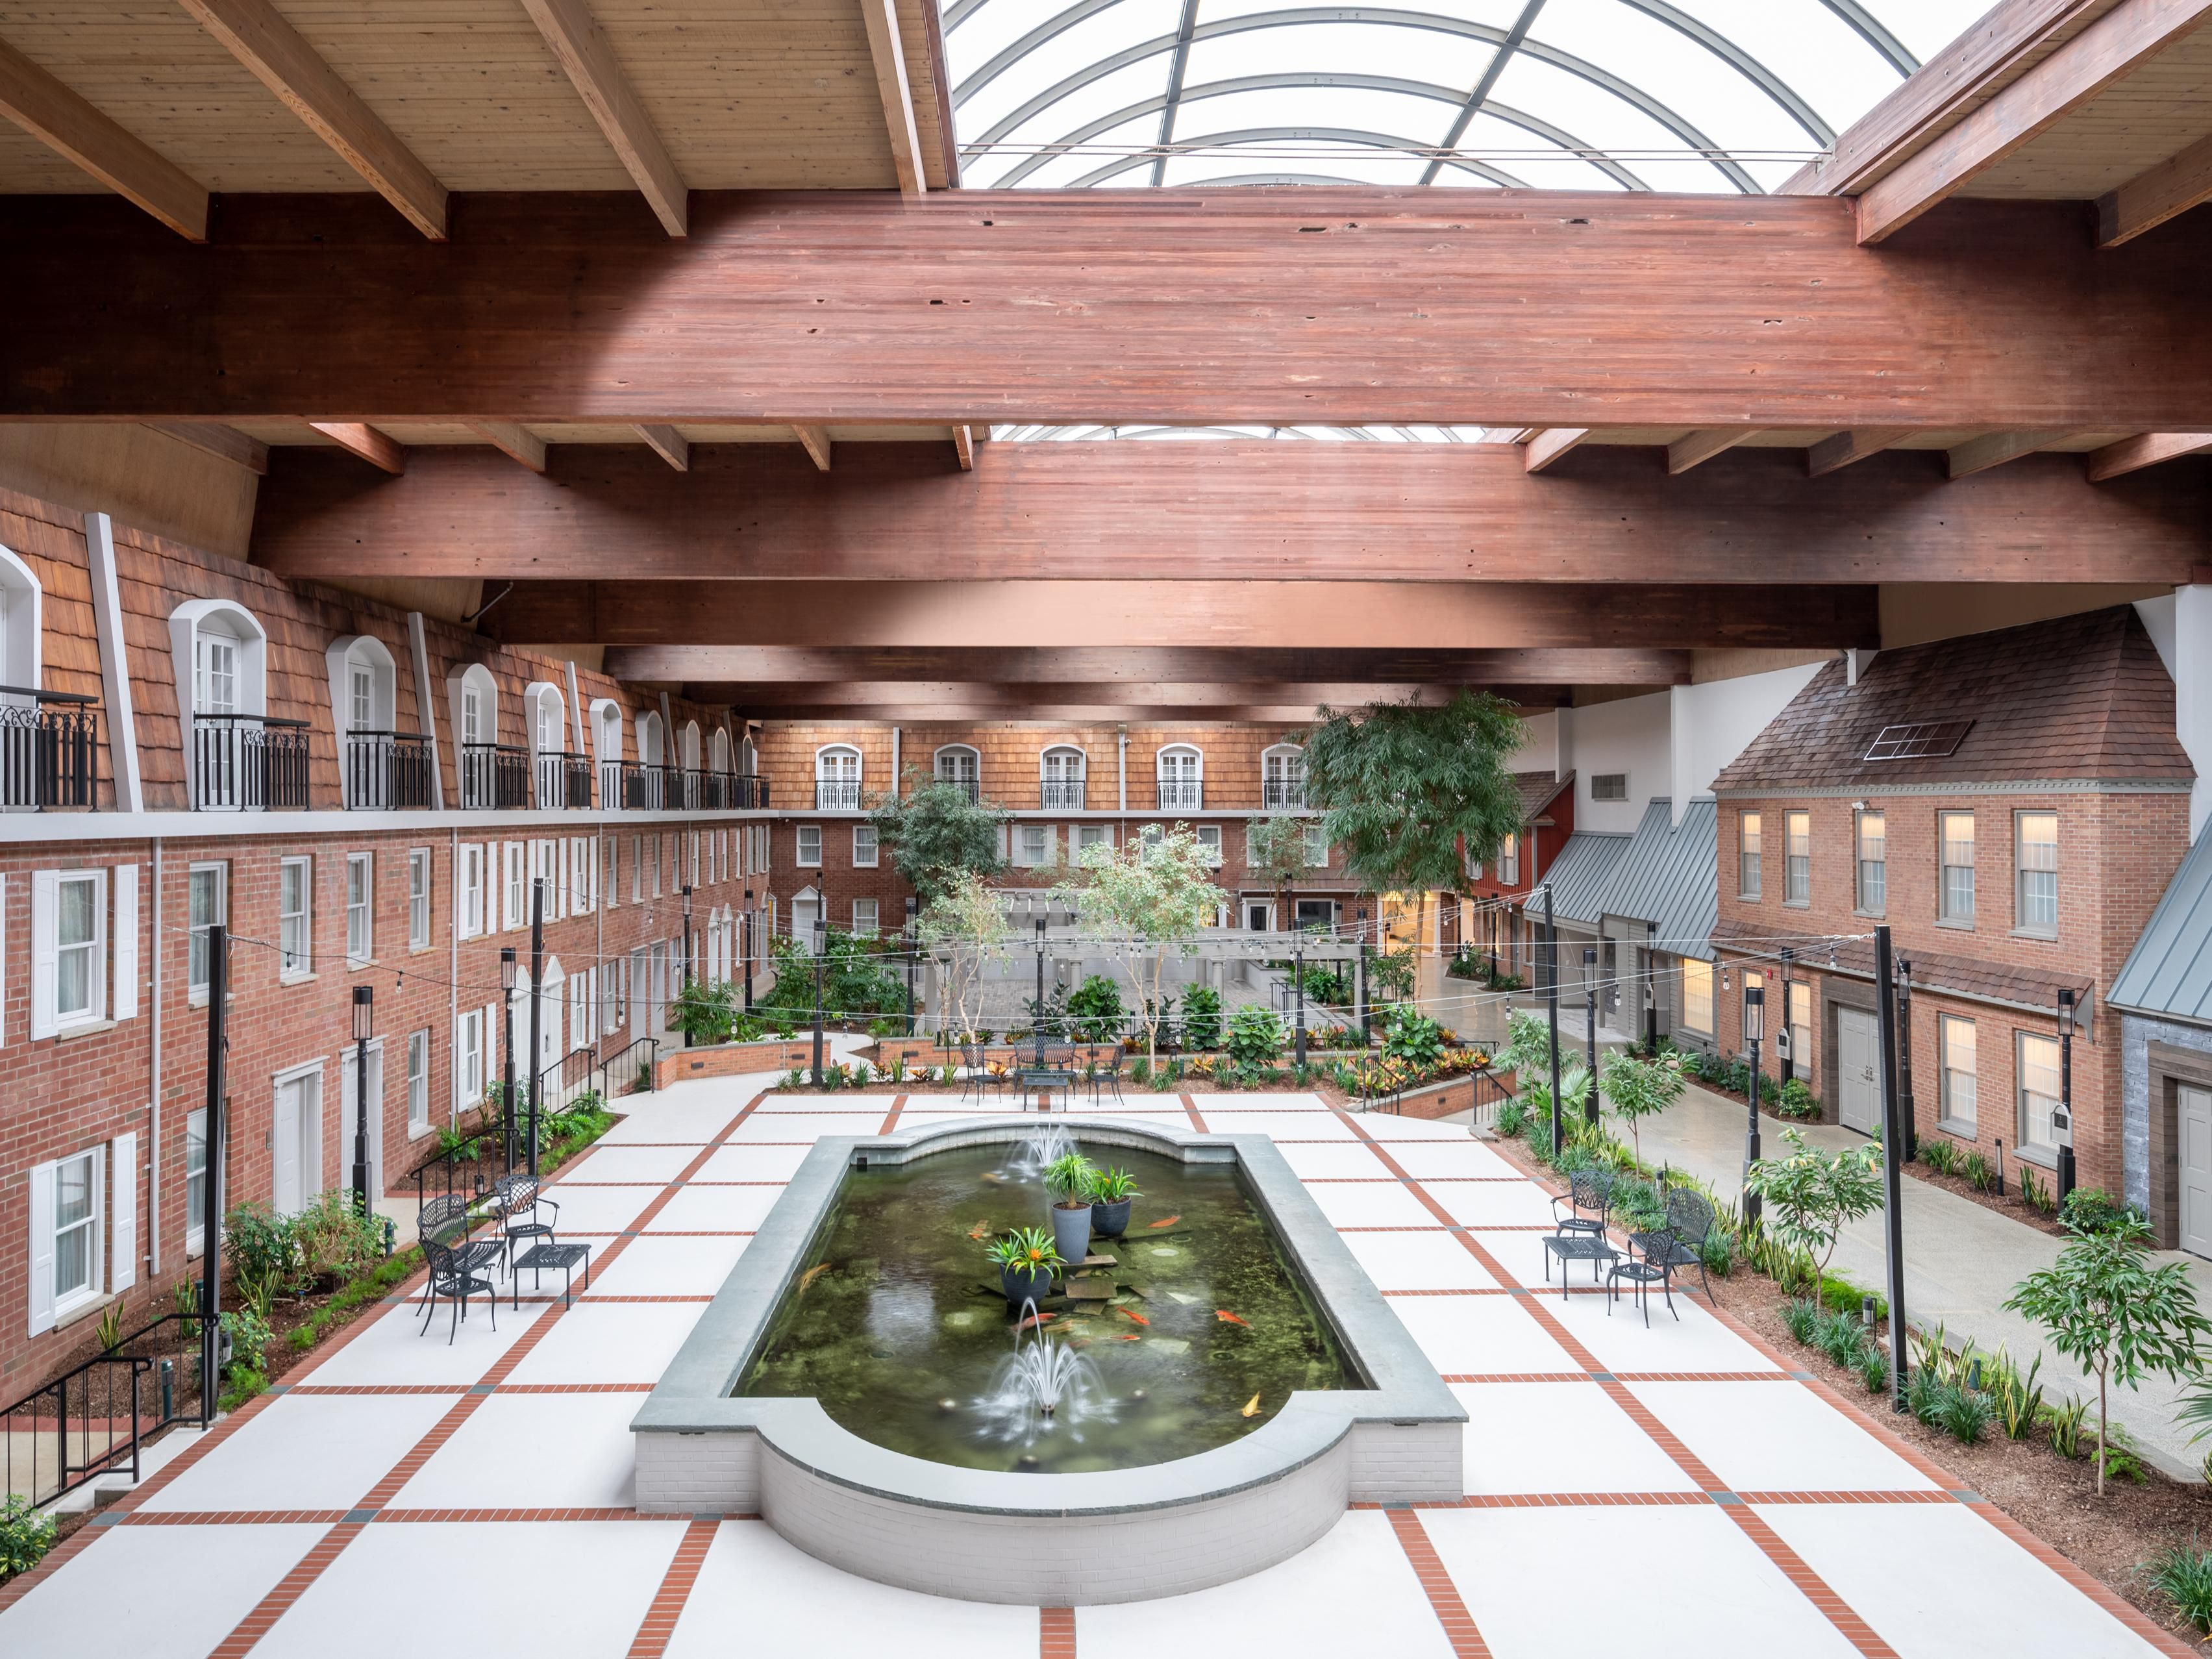 Our two indoor courtyards are a guest favorite with 31′ and 34′ high ceilings featuring brick walkways, large atrium skylights, a koi pond, and guest room balconies that overlook year-round landscaping. They make the perfect venue to host your next tradeshow or meeting, or to celebrate a wedding, gala or any social occasion.